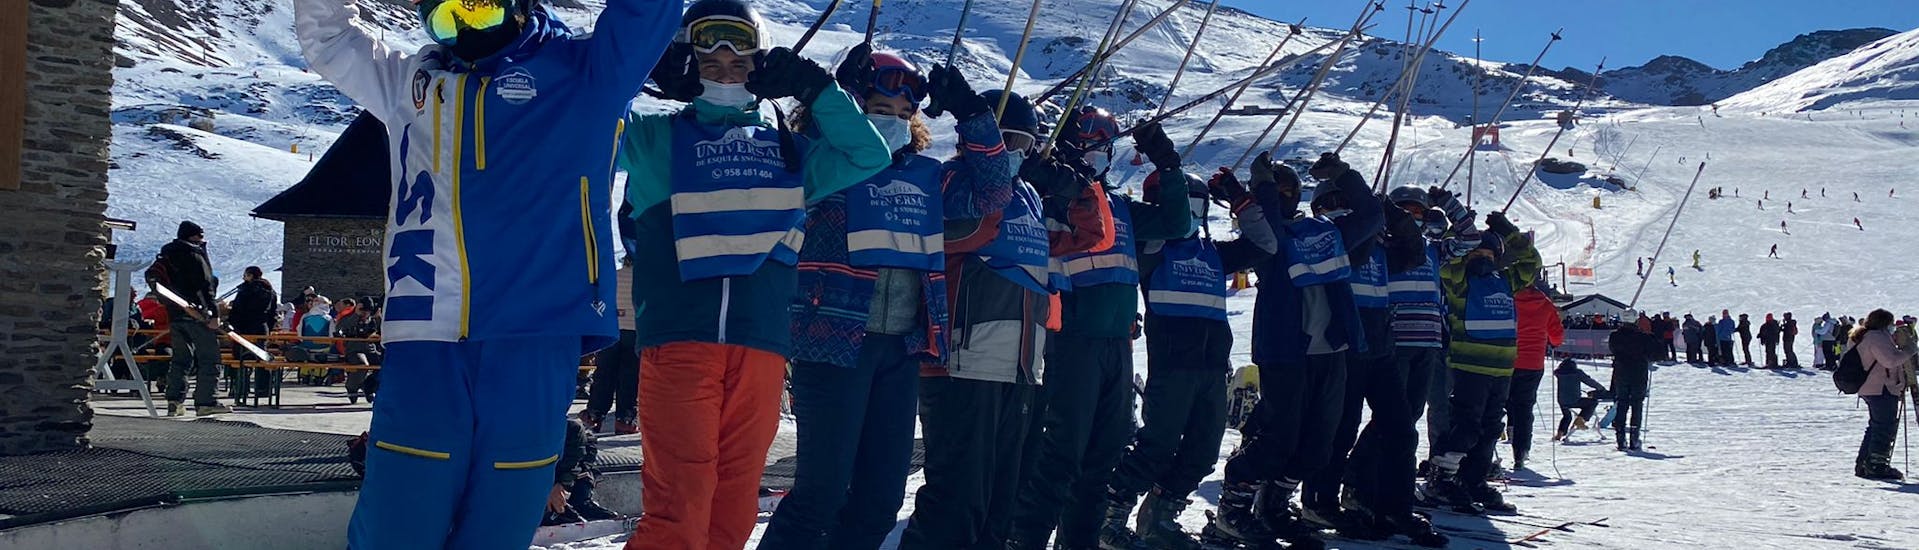 Students learn to ski during a ski lesson for beginners with Escuela Universal de Ski Sierra Nevada.